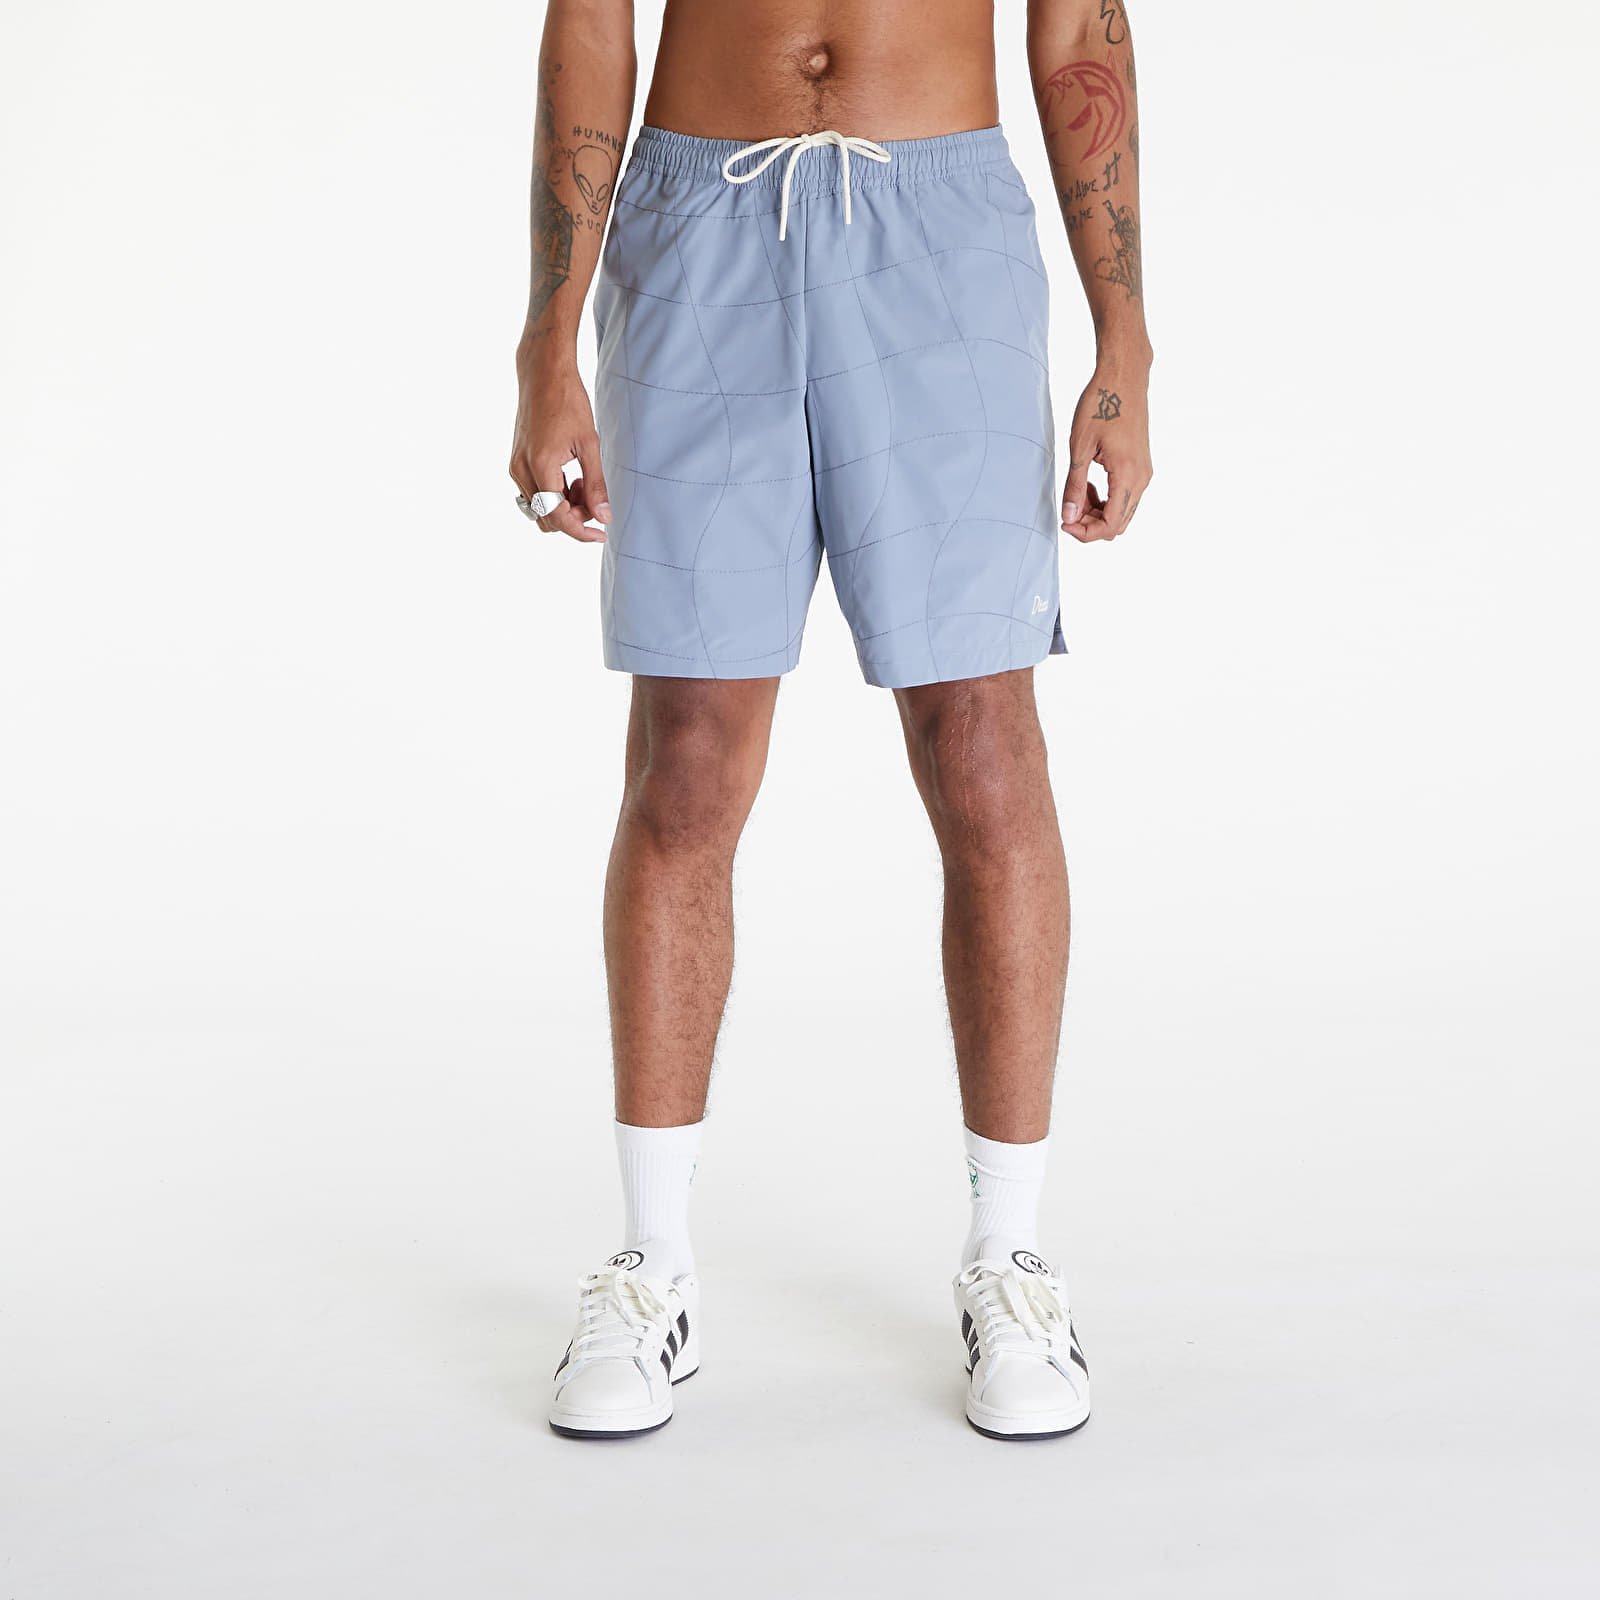 Wave Quilted Shorts